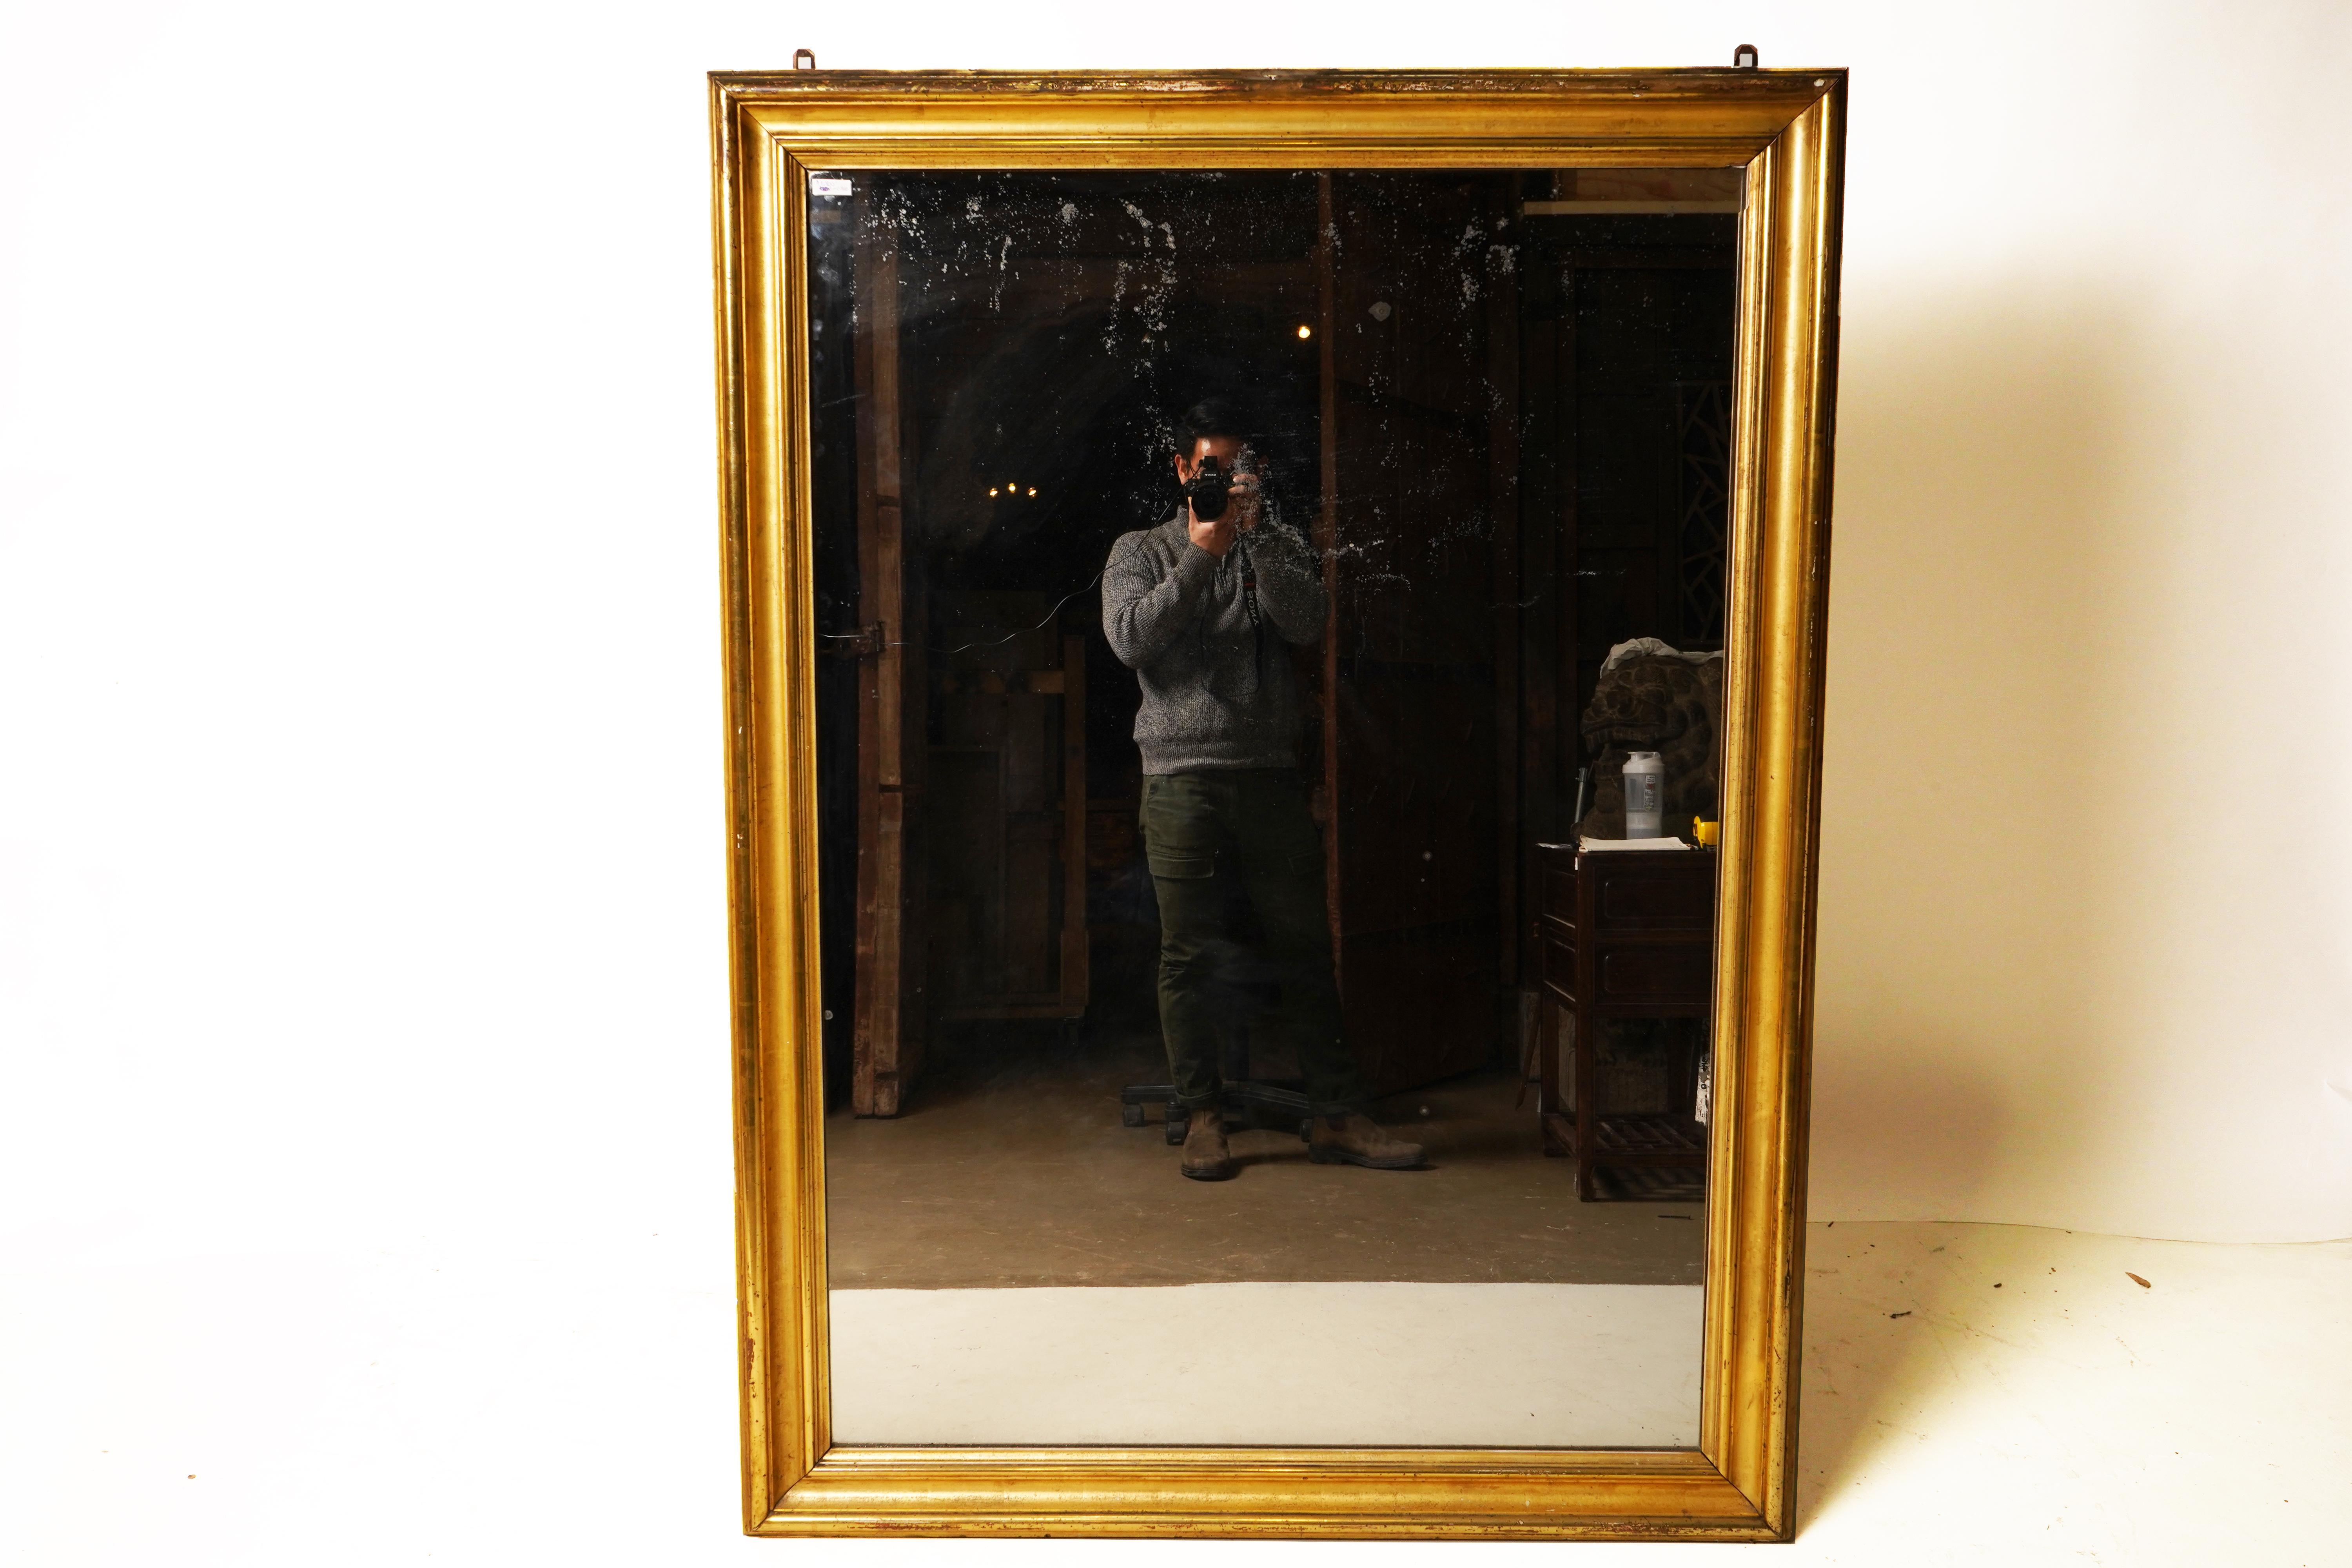 A French gold leaf mirror with original glass. The mirror can be hung horizontally or vertically.